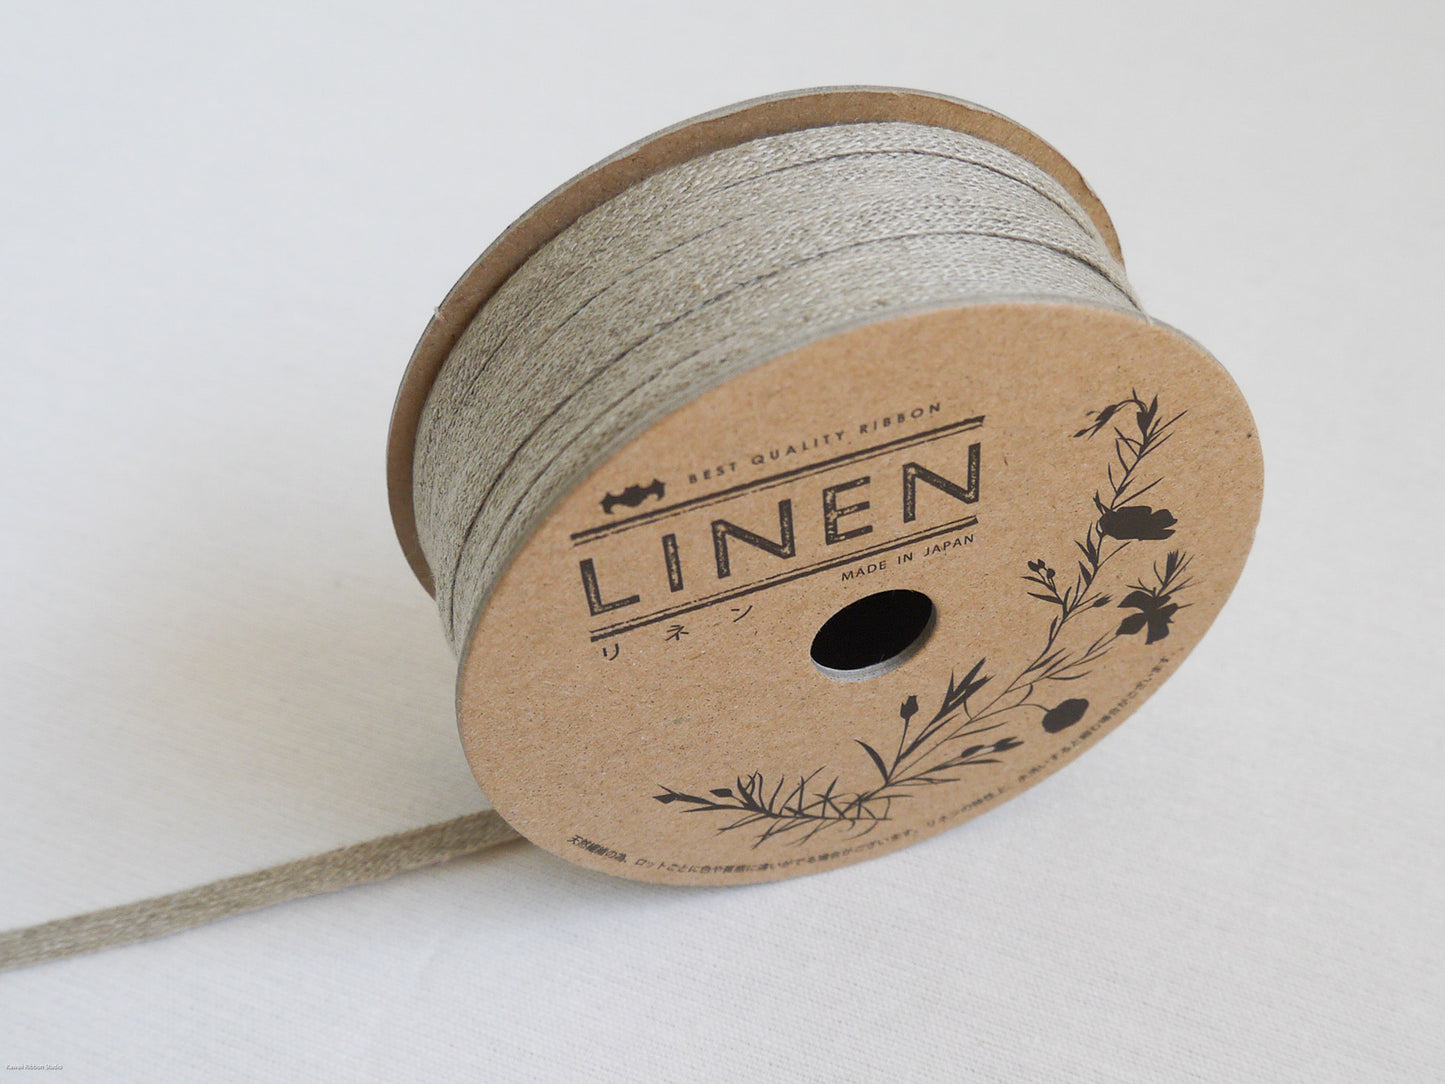 1mm, 3mm, 5mm flat cord in 100% washed linen